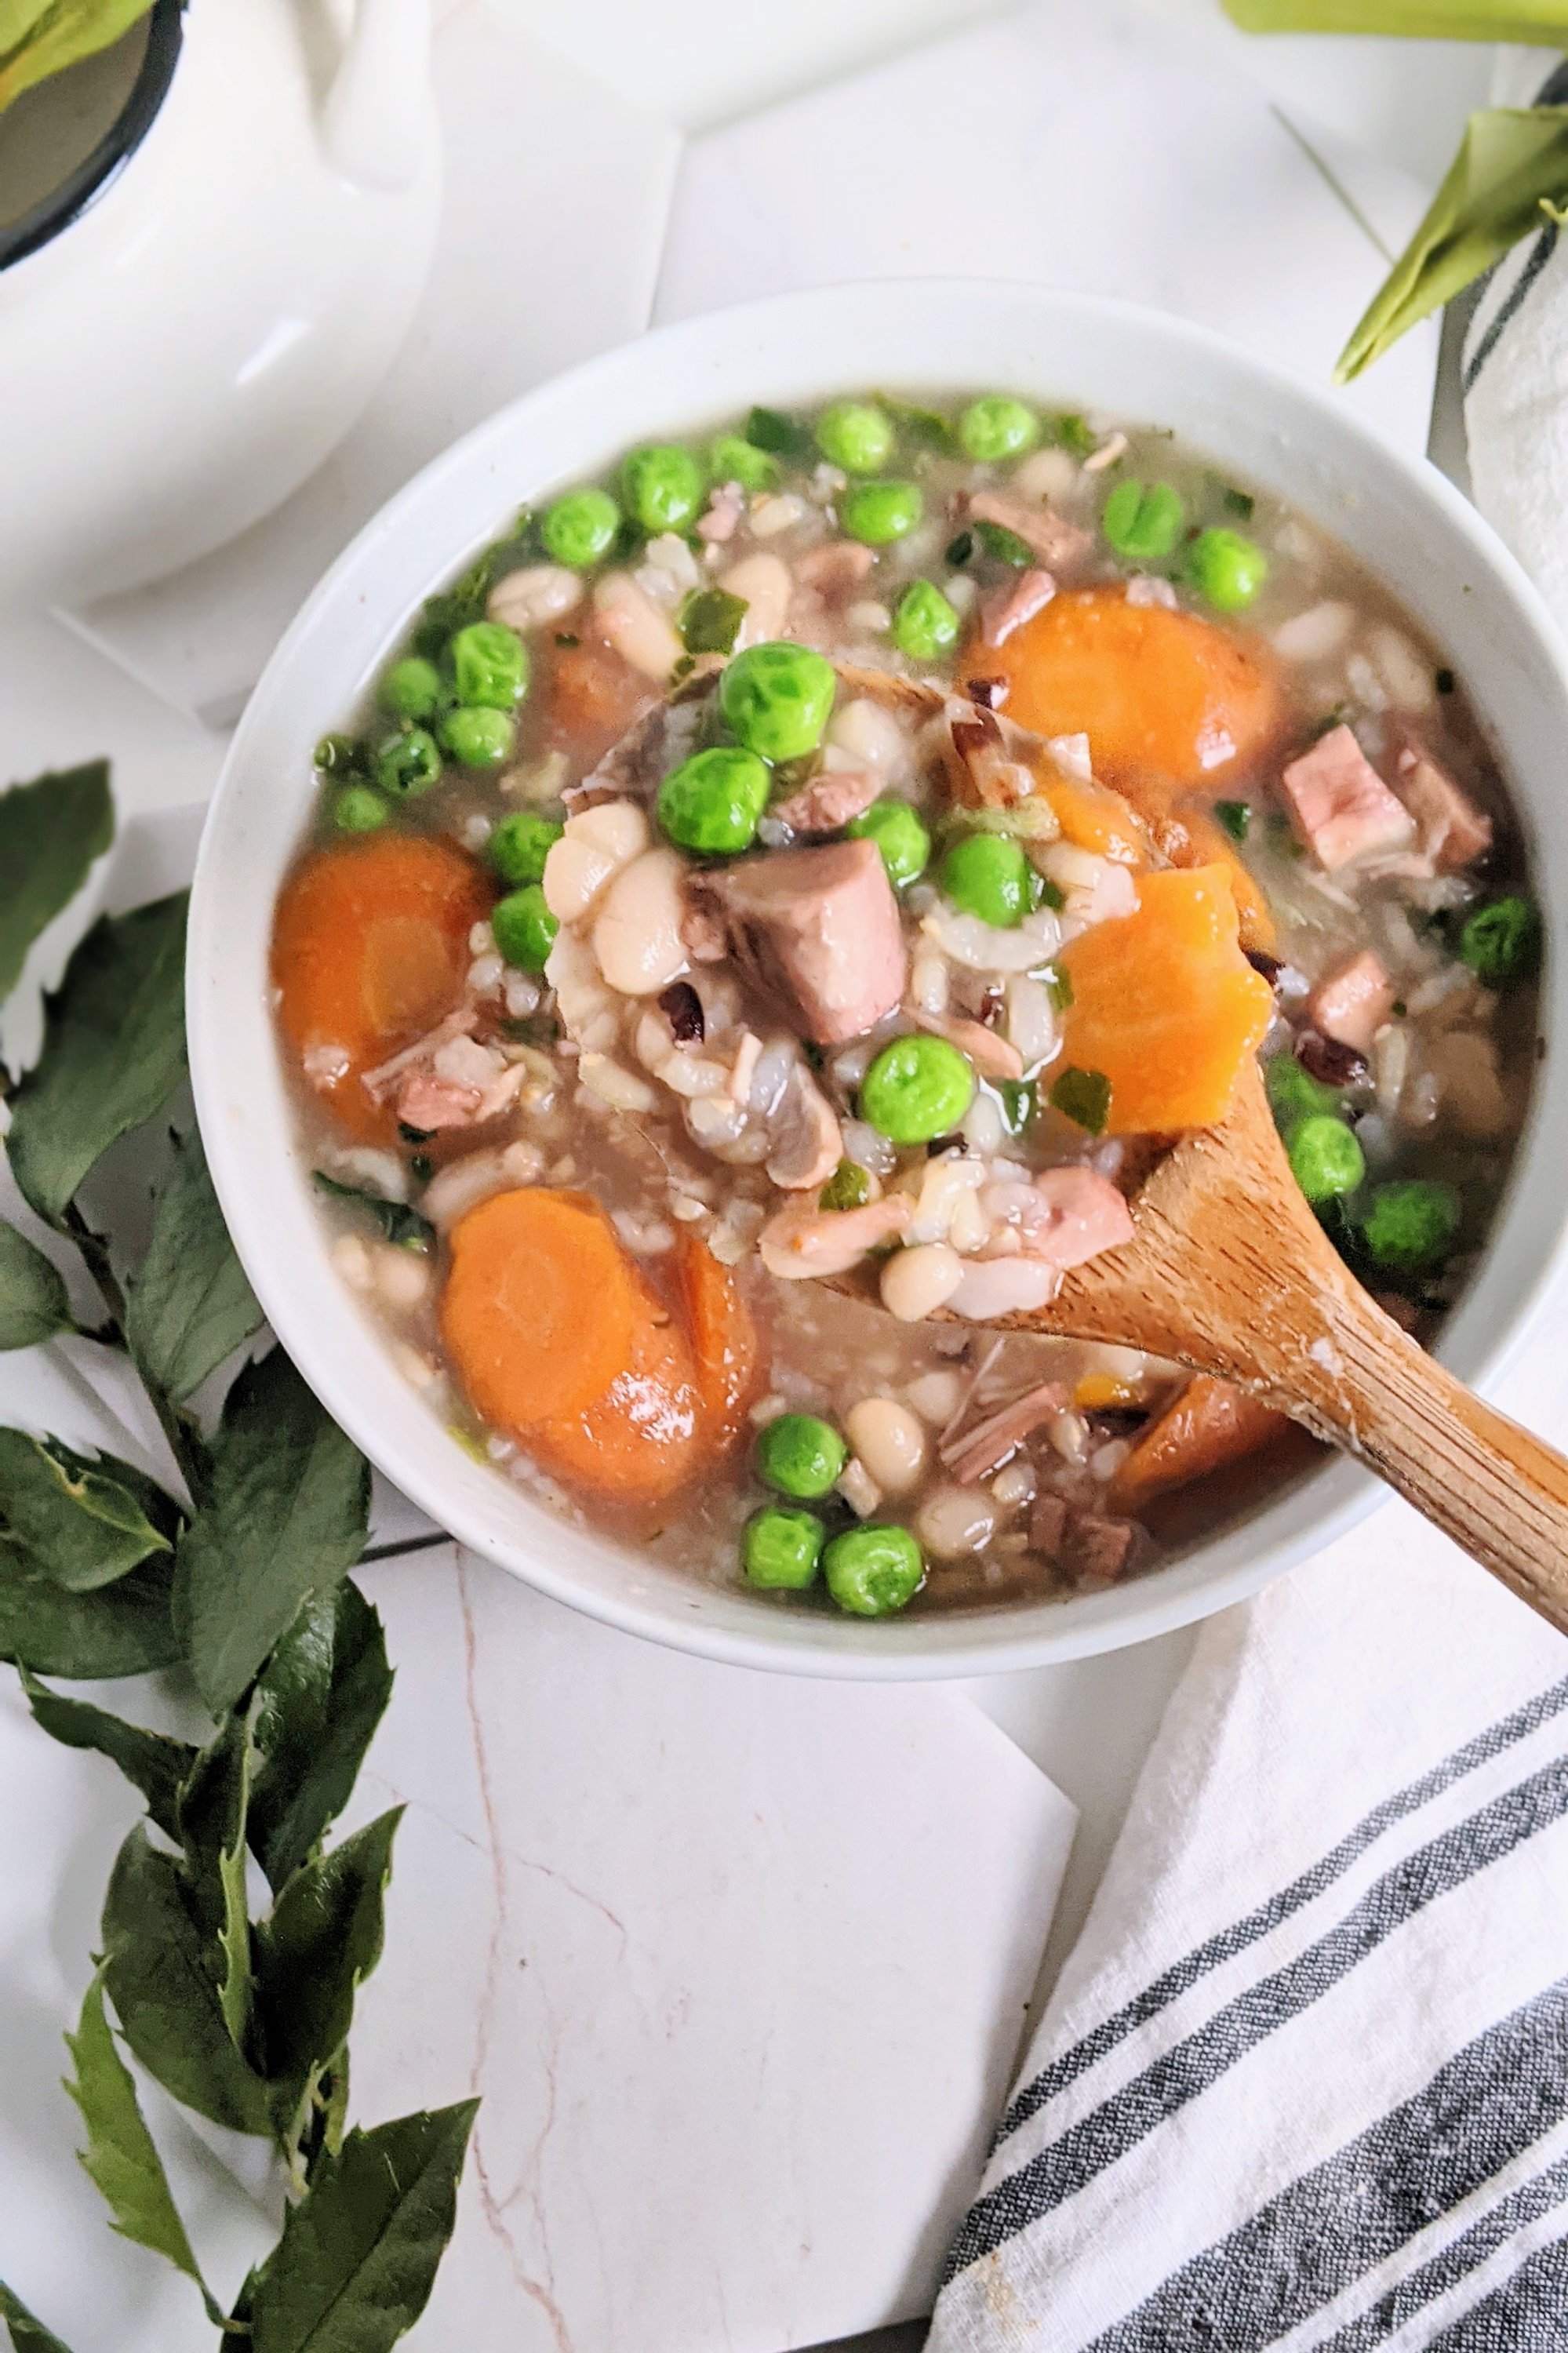 gluten free turkey soup recipe with beans and wild rice white beans cannellini beans healthy navy bean and turkey soup recipe leftover cooked turkey from thanksgiving recipes